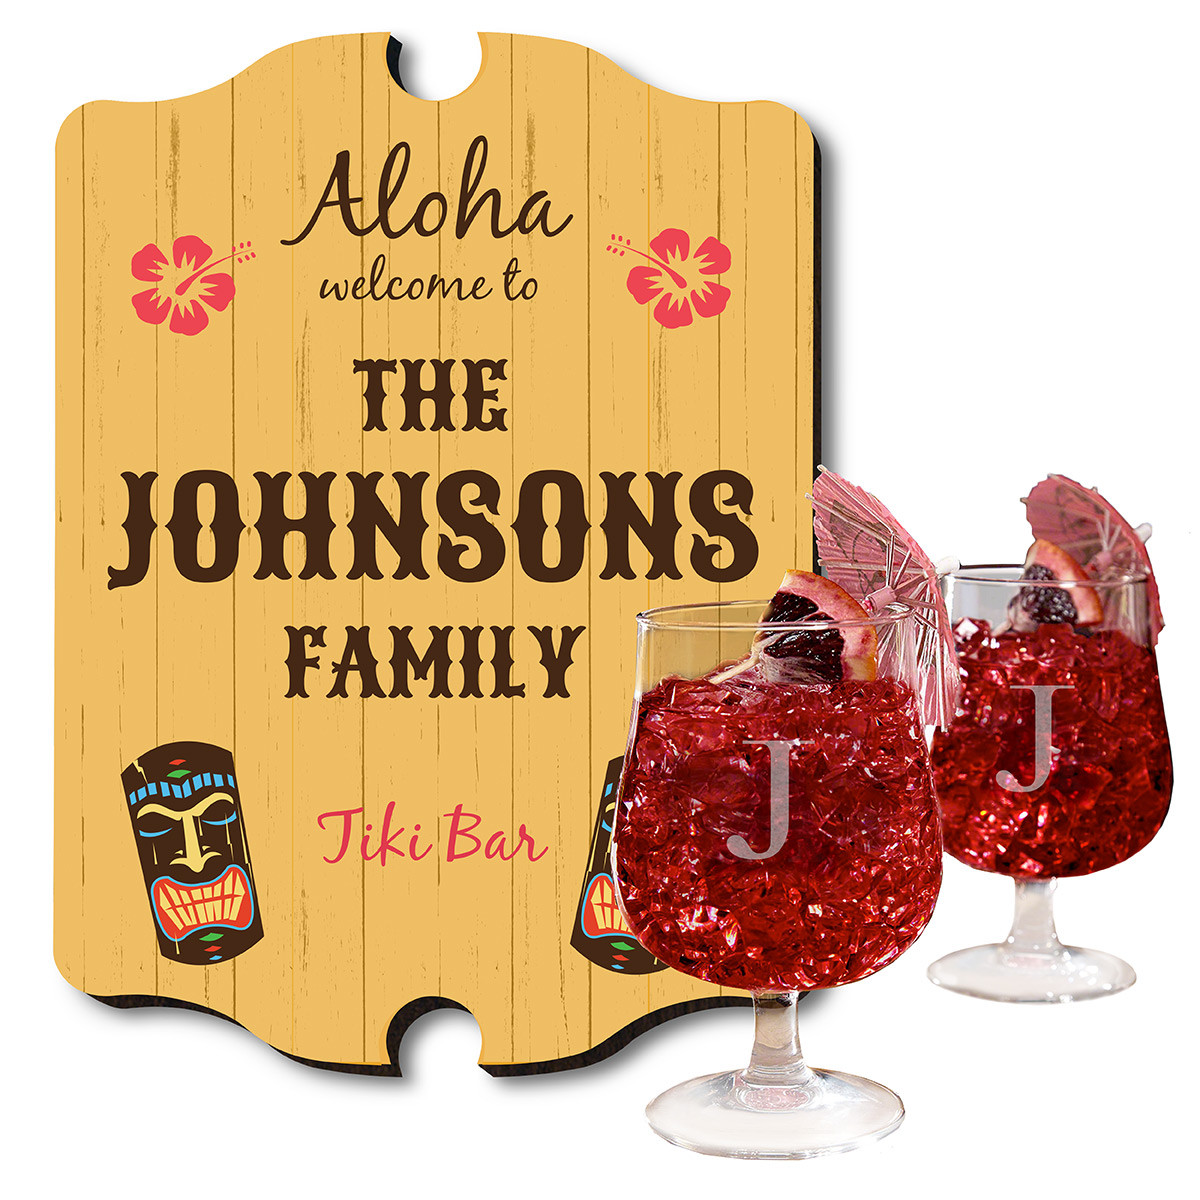 It's time to make some party punch, bring out the limbo stick, and get lei'd. Your next pool party is sure to be a hit, especially with our personalized Tiki Bar sign leading straight to the drinks. This set also includes two custom engraved cocktail glas #bar